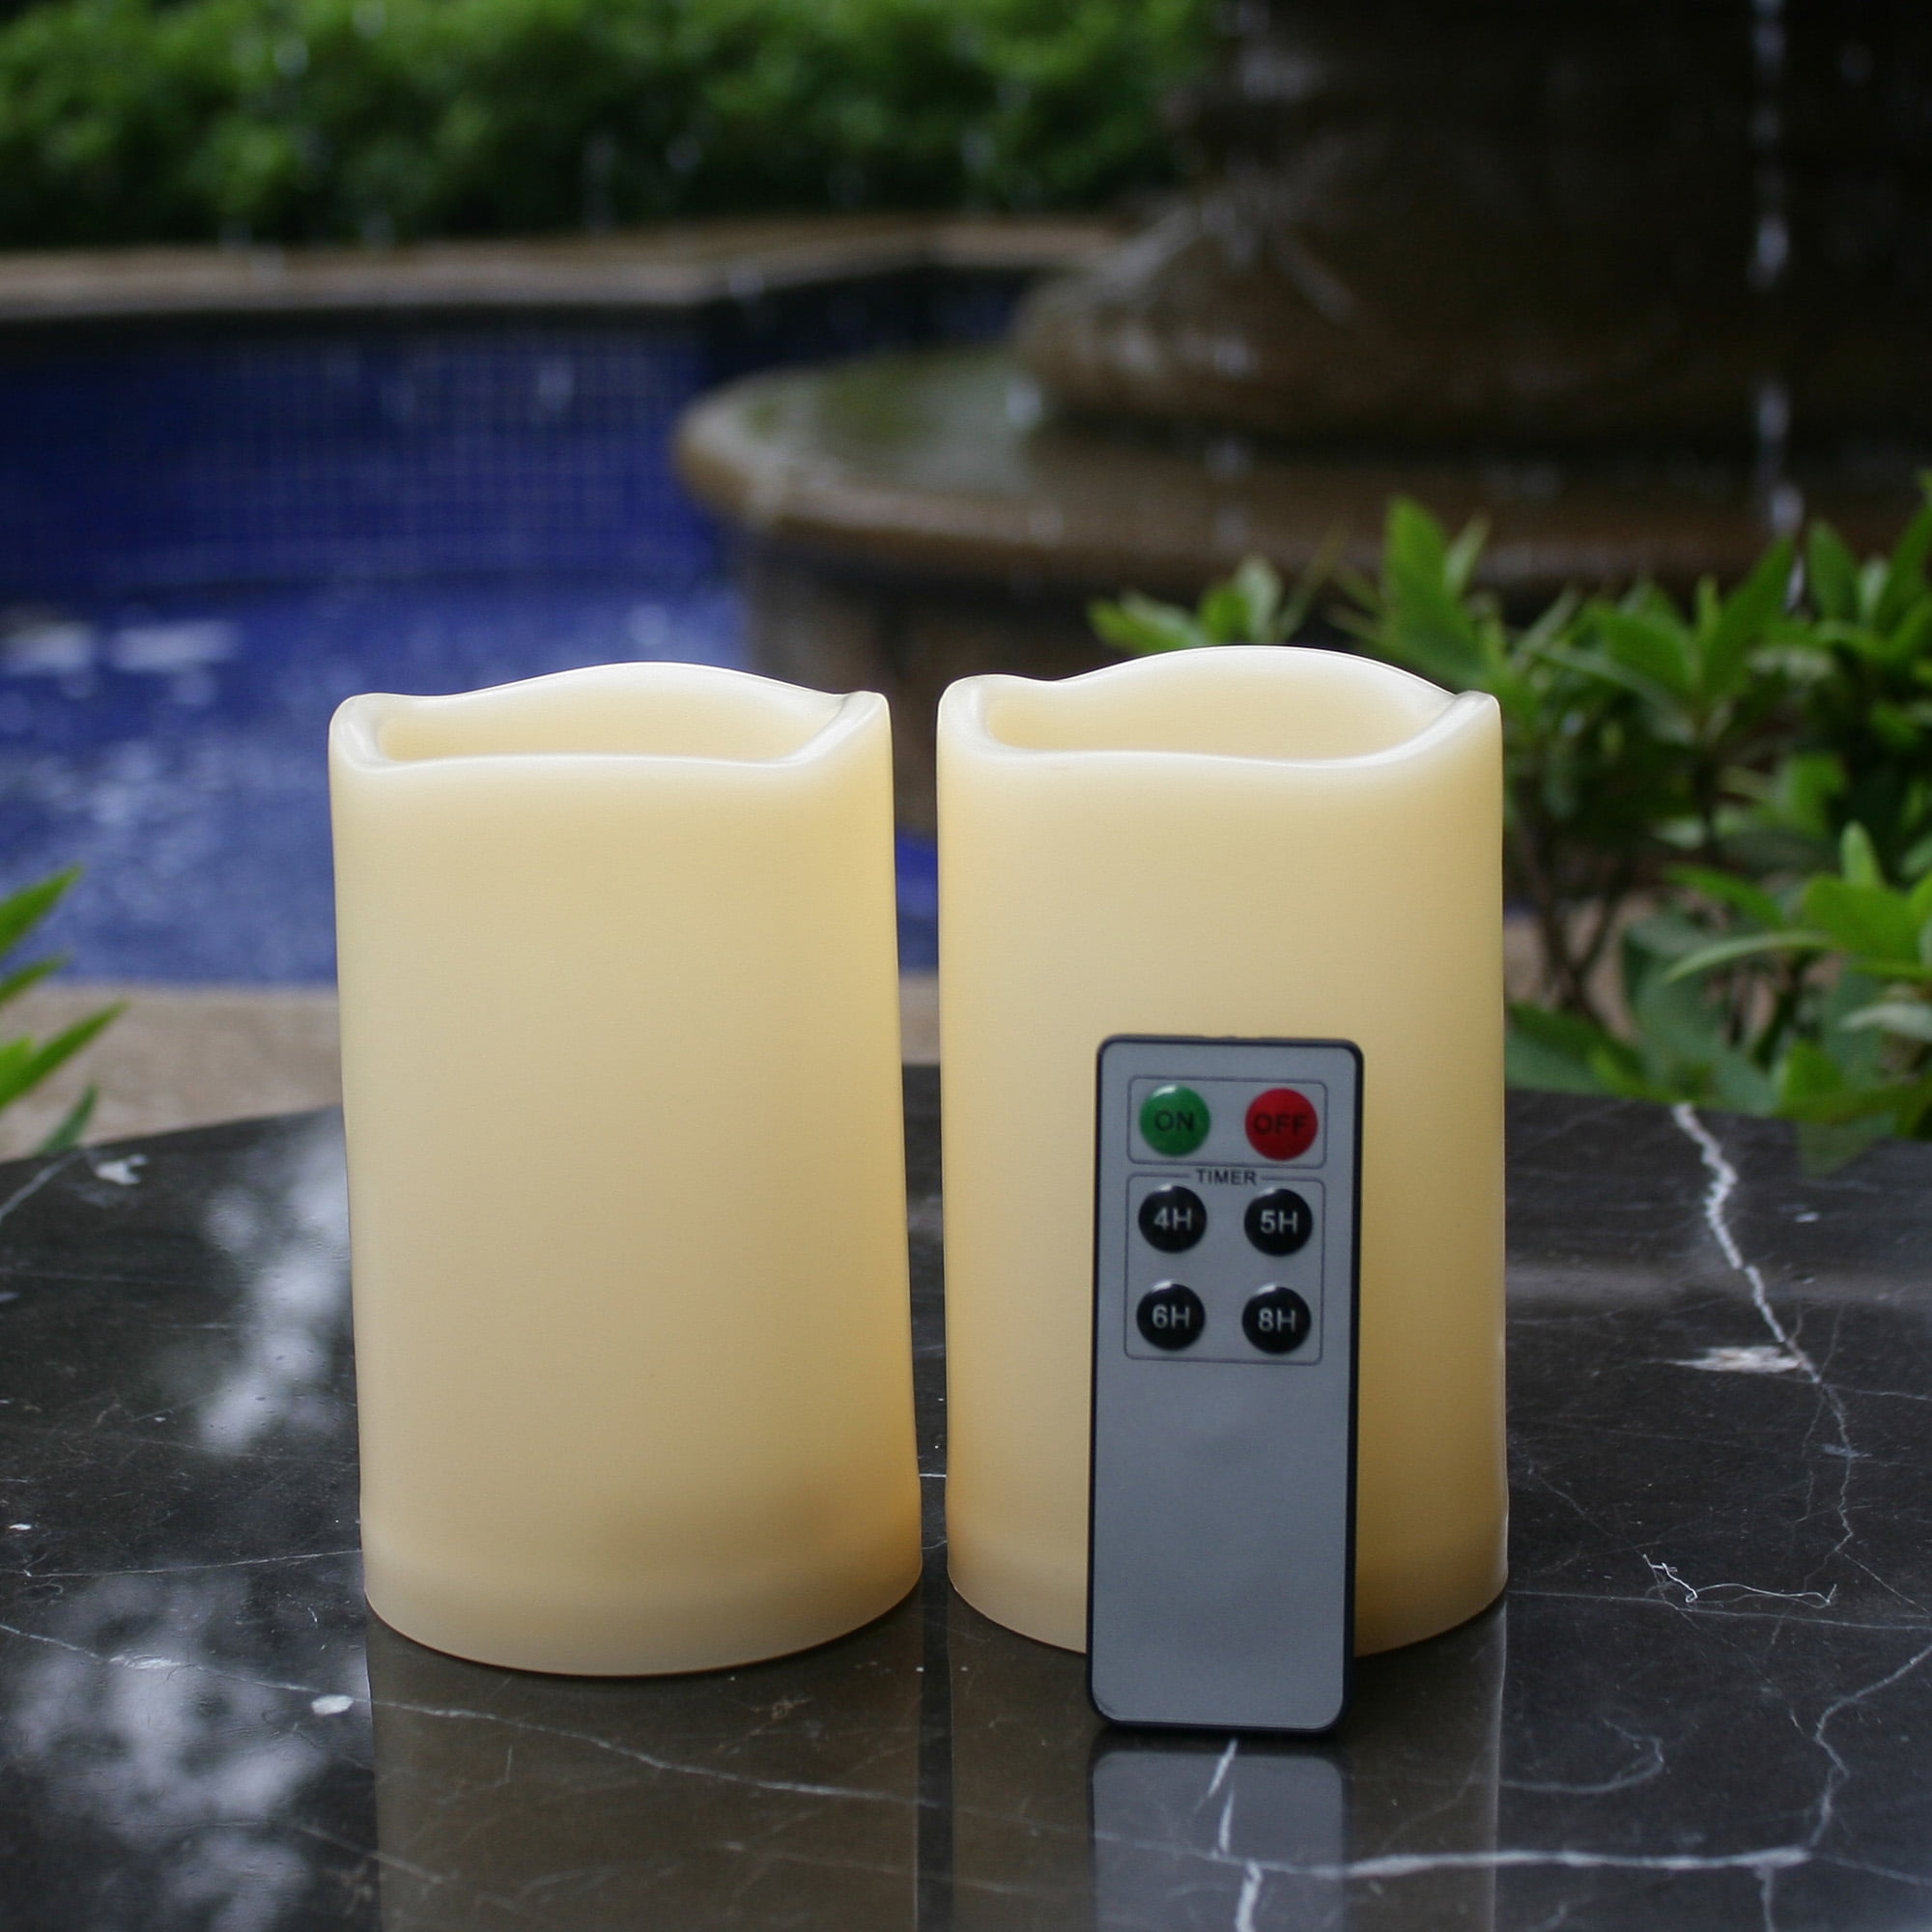 Flameless LED Candles with 4/8Hours Timer Function Church/Votive/Hurricane Lamp/Lantern/Tealight Candles Indoor Outdoor Flickering Battery Operated Electronic Plastic Pillar Candle Ivory Color 4 